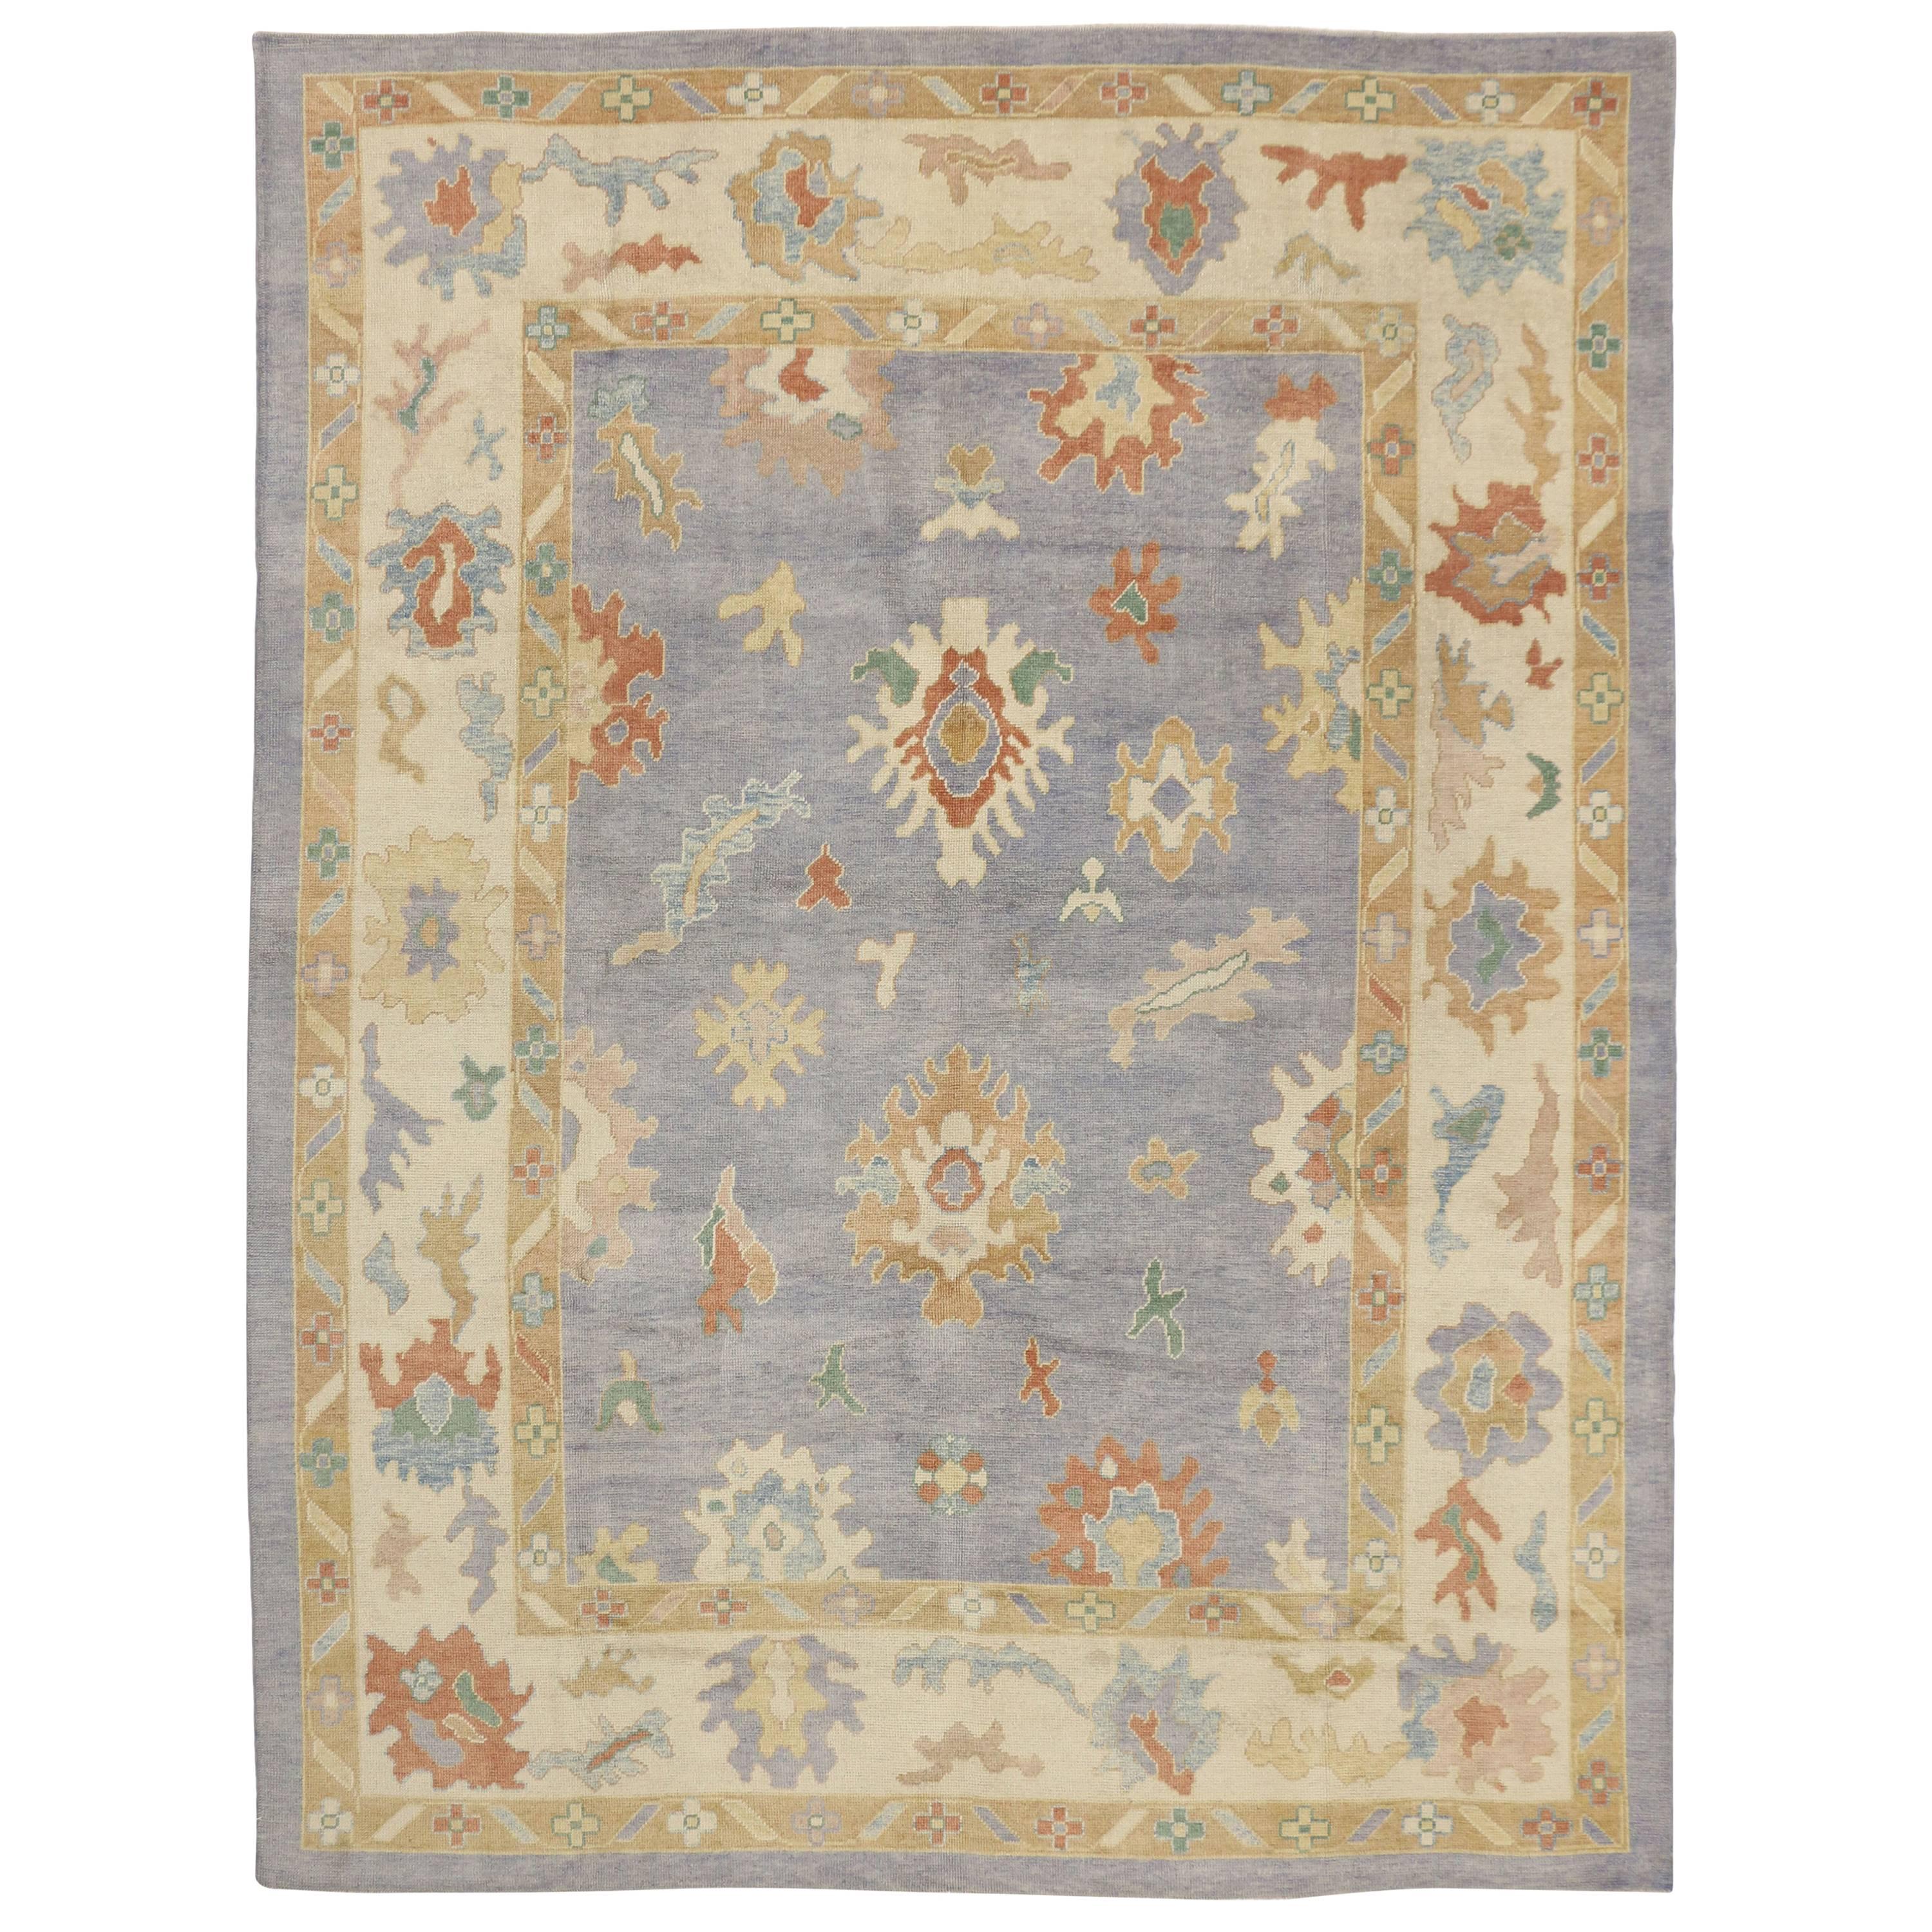 Contemporary Turkish Oushak Rug with Pastel Colors and Tribal Boho Chic